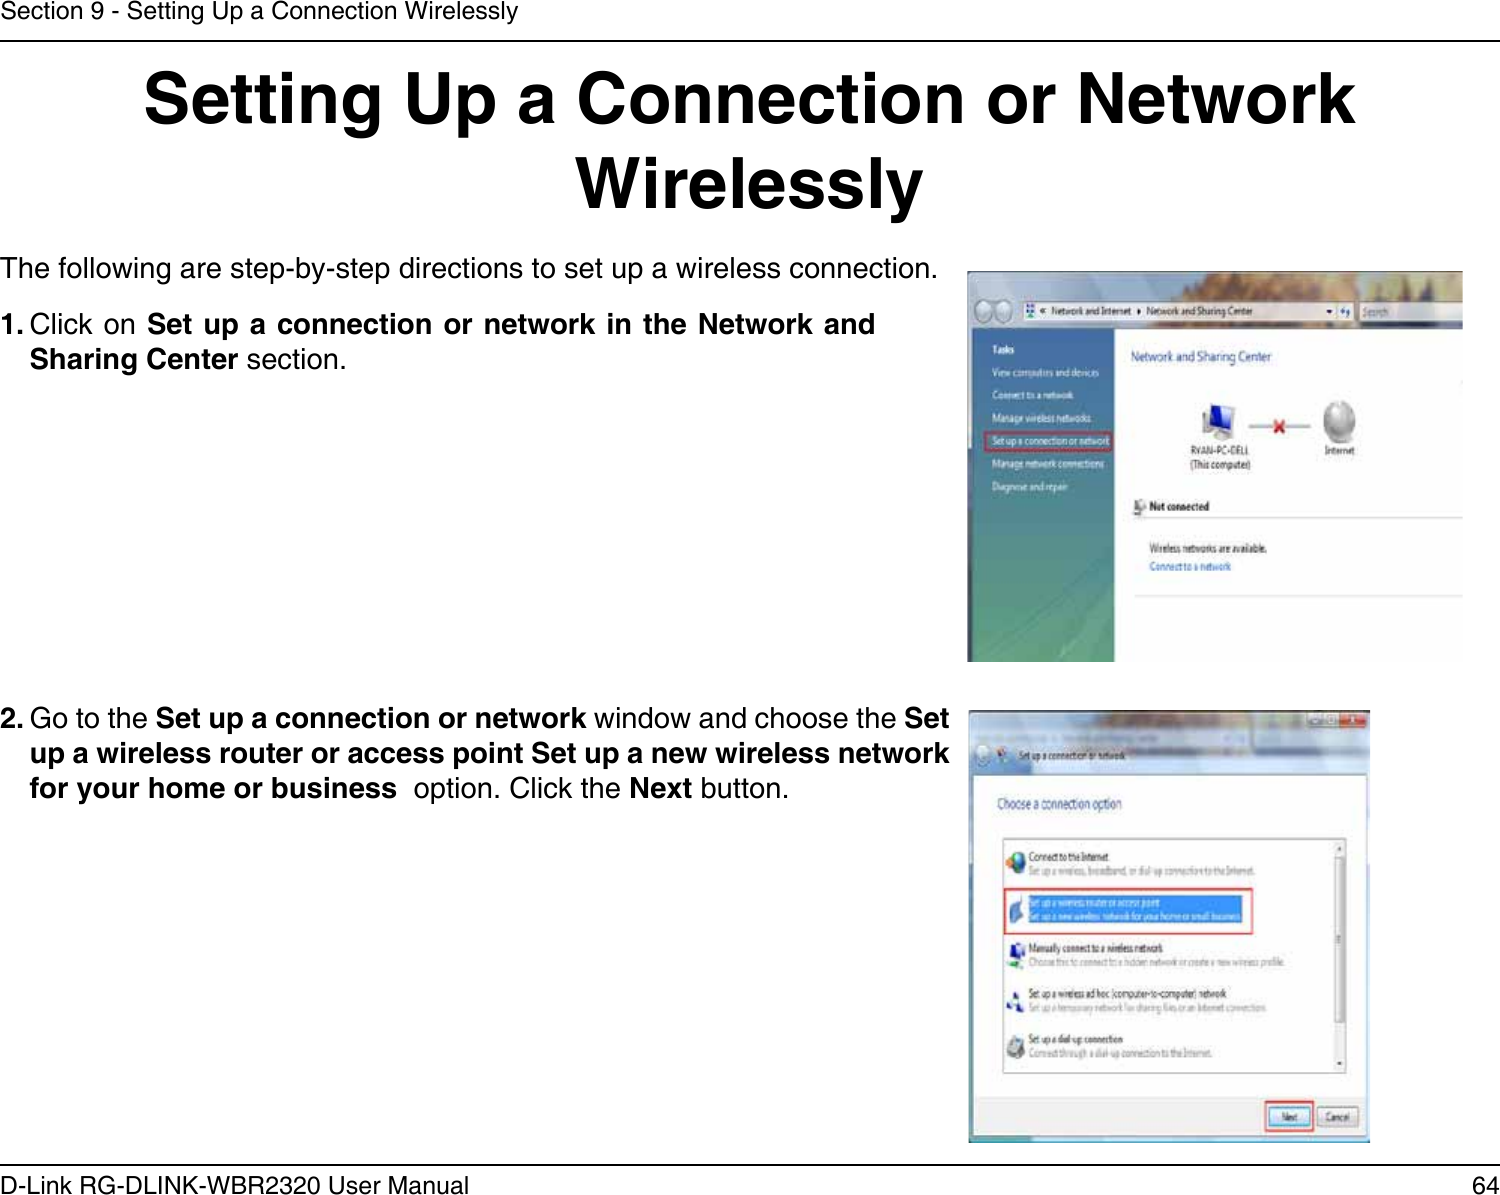 64D-Link RG-DLINK-WBR2320 User ManualSection 9 - Setting Up a Connection WirelesslySetting Up a Connection or Network WirelesslyThe following are step-by-step directions to set up a wireless connection.2. Go to the Set up a connection or network window and choose the Set up a wireless router or access point Set up a new wireless network for your home or business  option. Click the Next button. 1. Click on Set up a connection or network in the Network and Sharing Center section. 